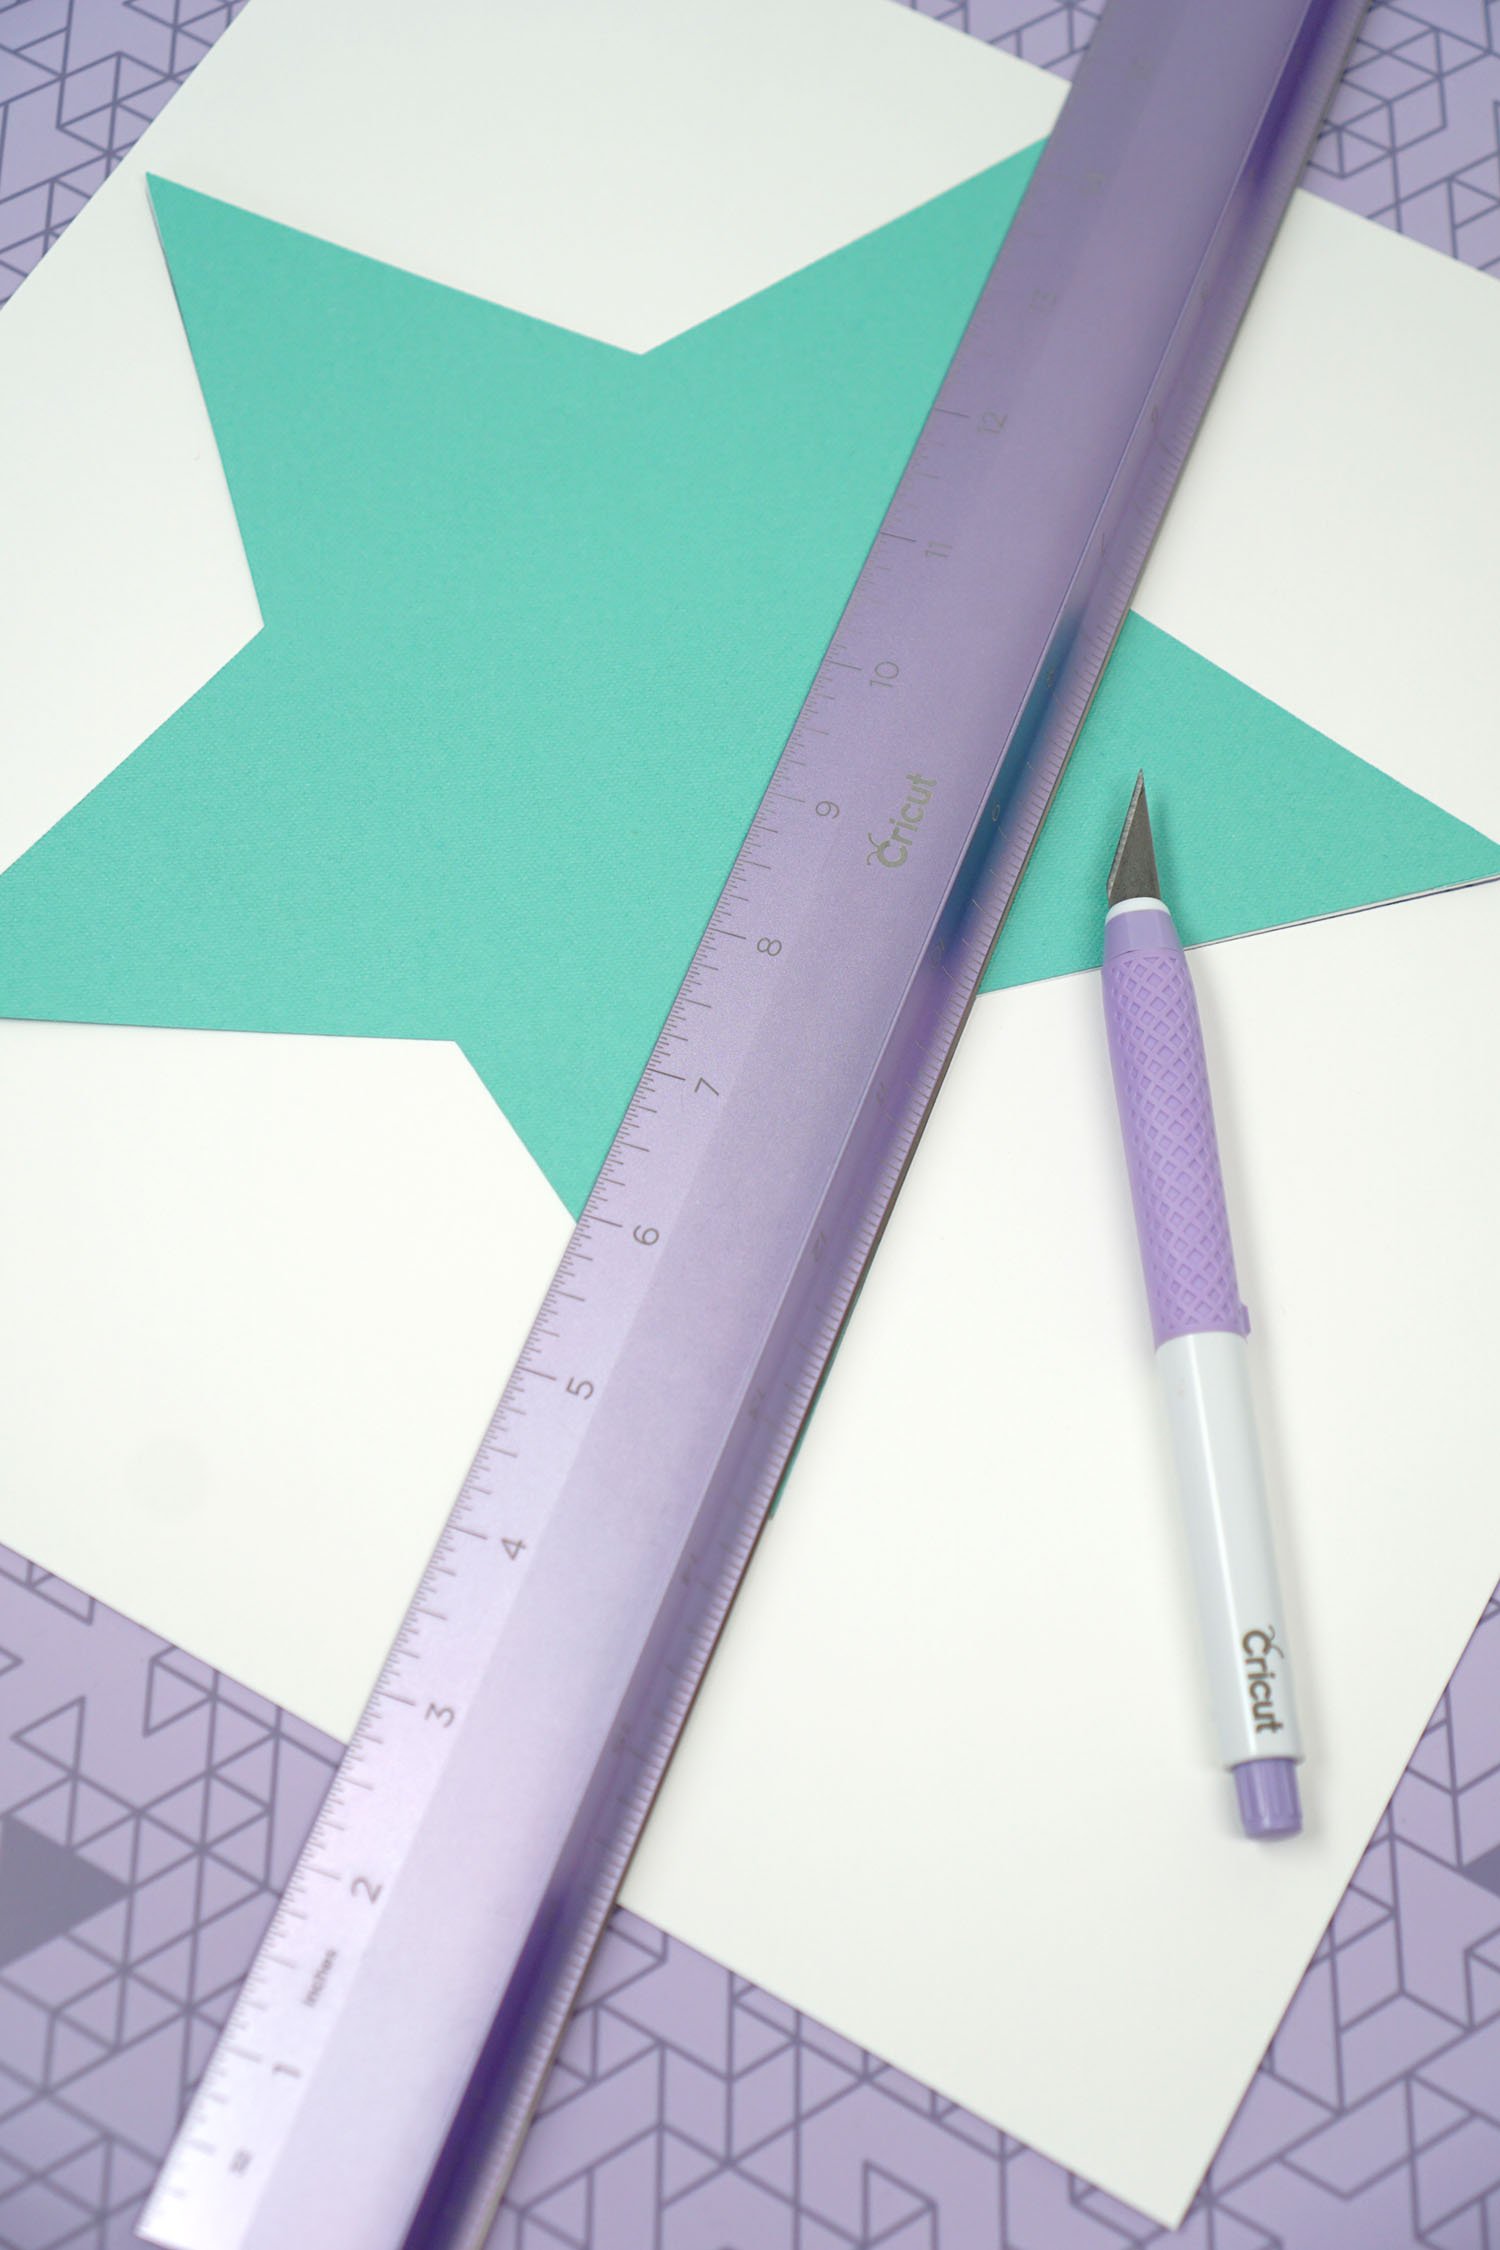 stars cut for DIY pinata craft with ruler and true control knife pictured